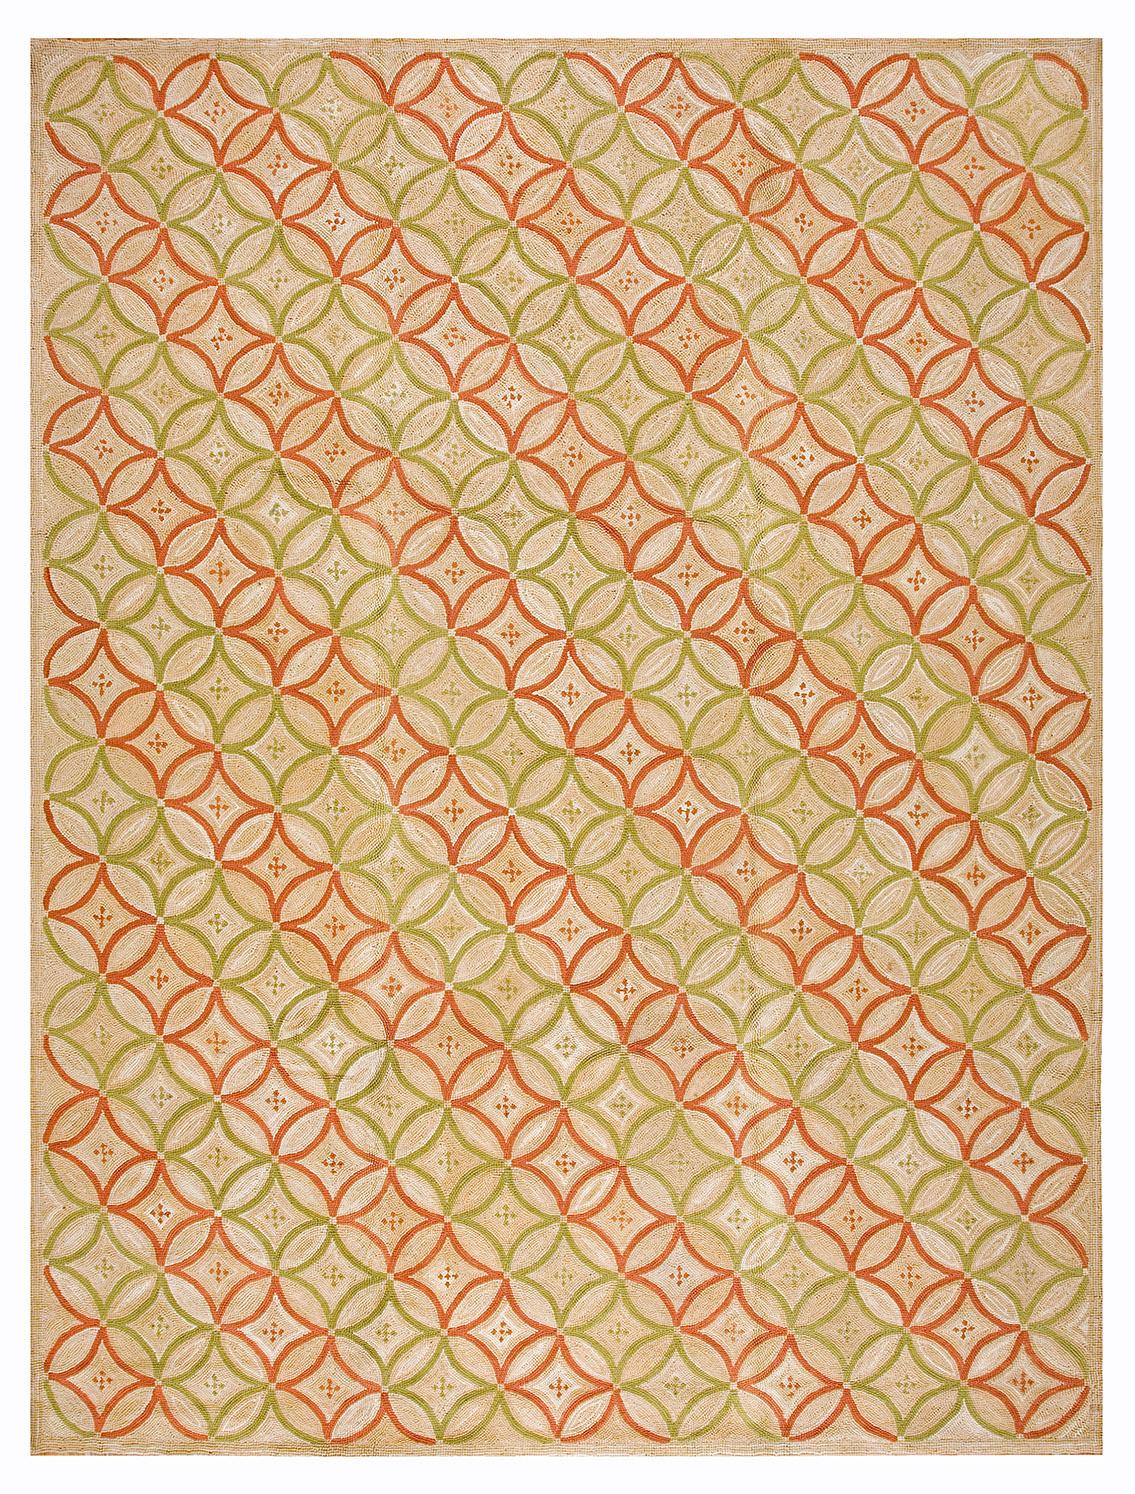 Contemporary Handmade Cotton Hooked Rug ( 6' x 9' - 183 x 274 cm ) For Sale